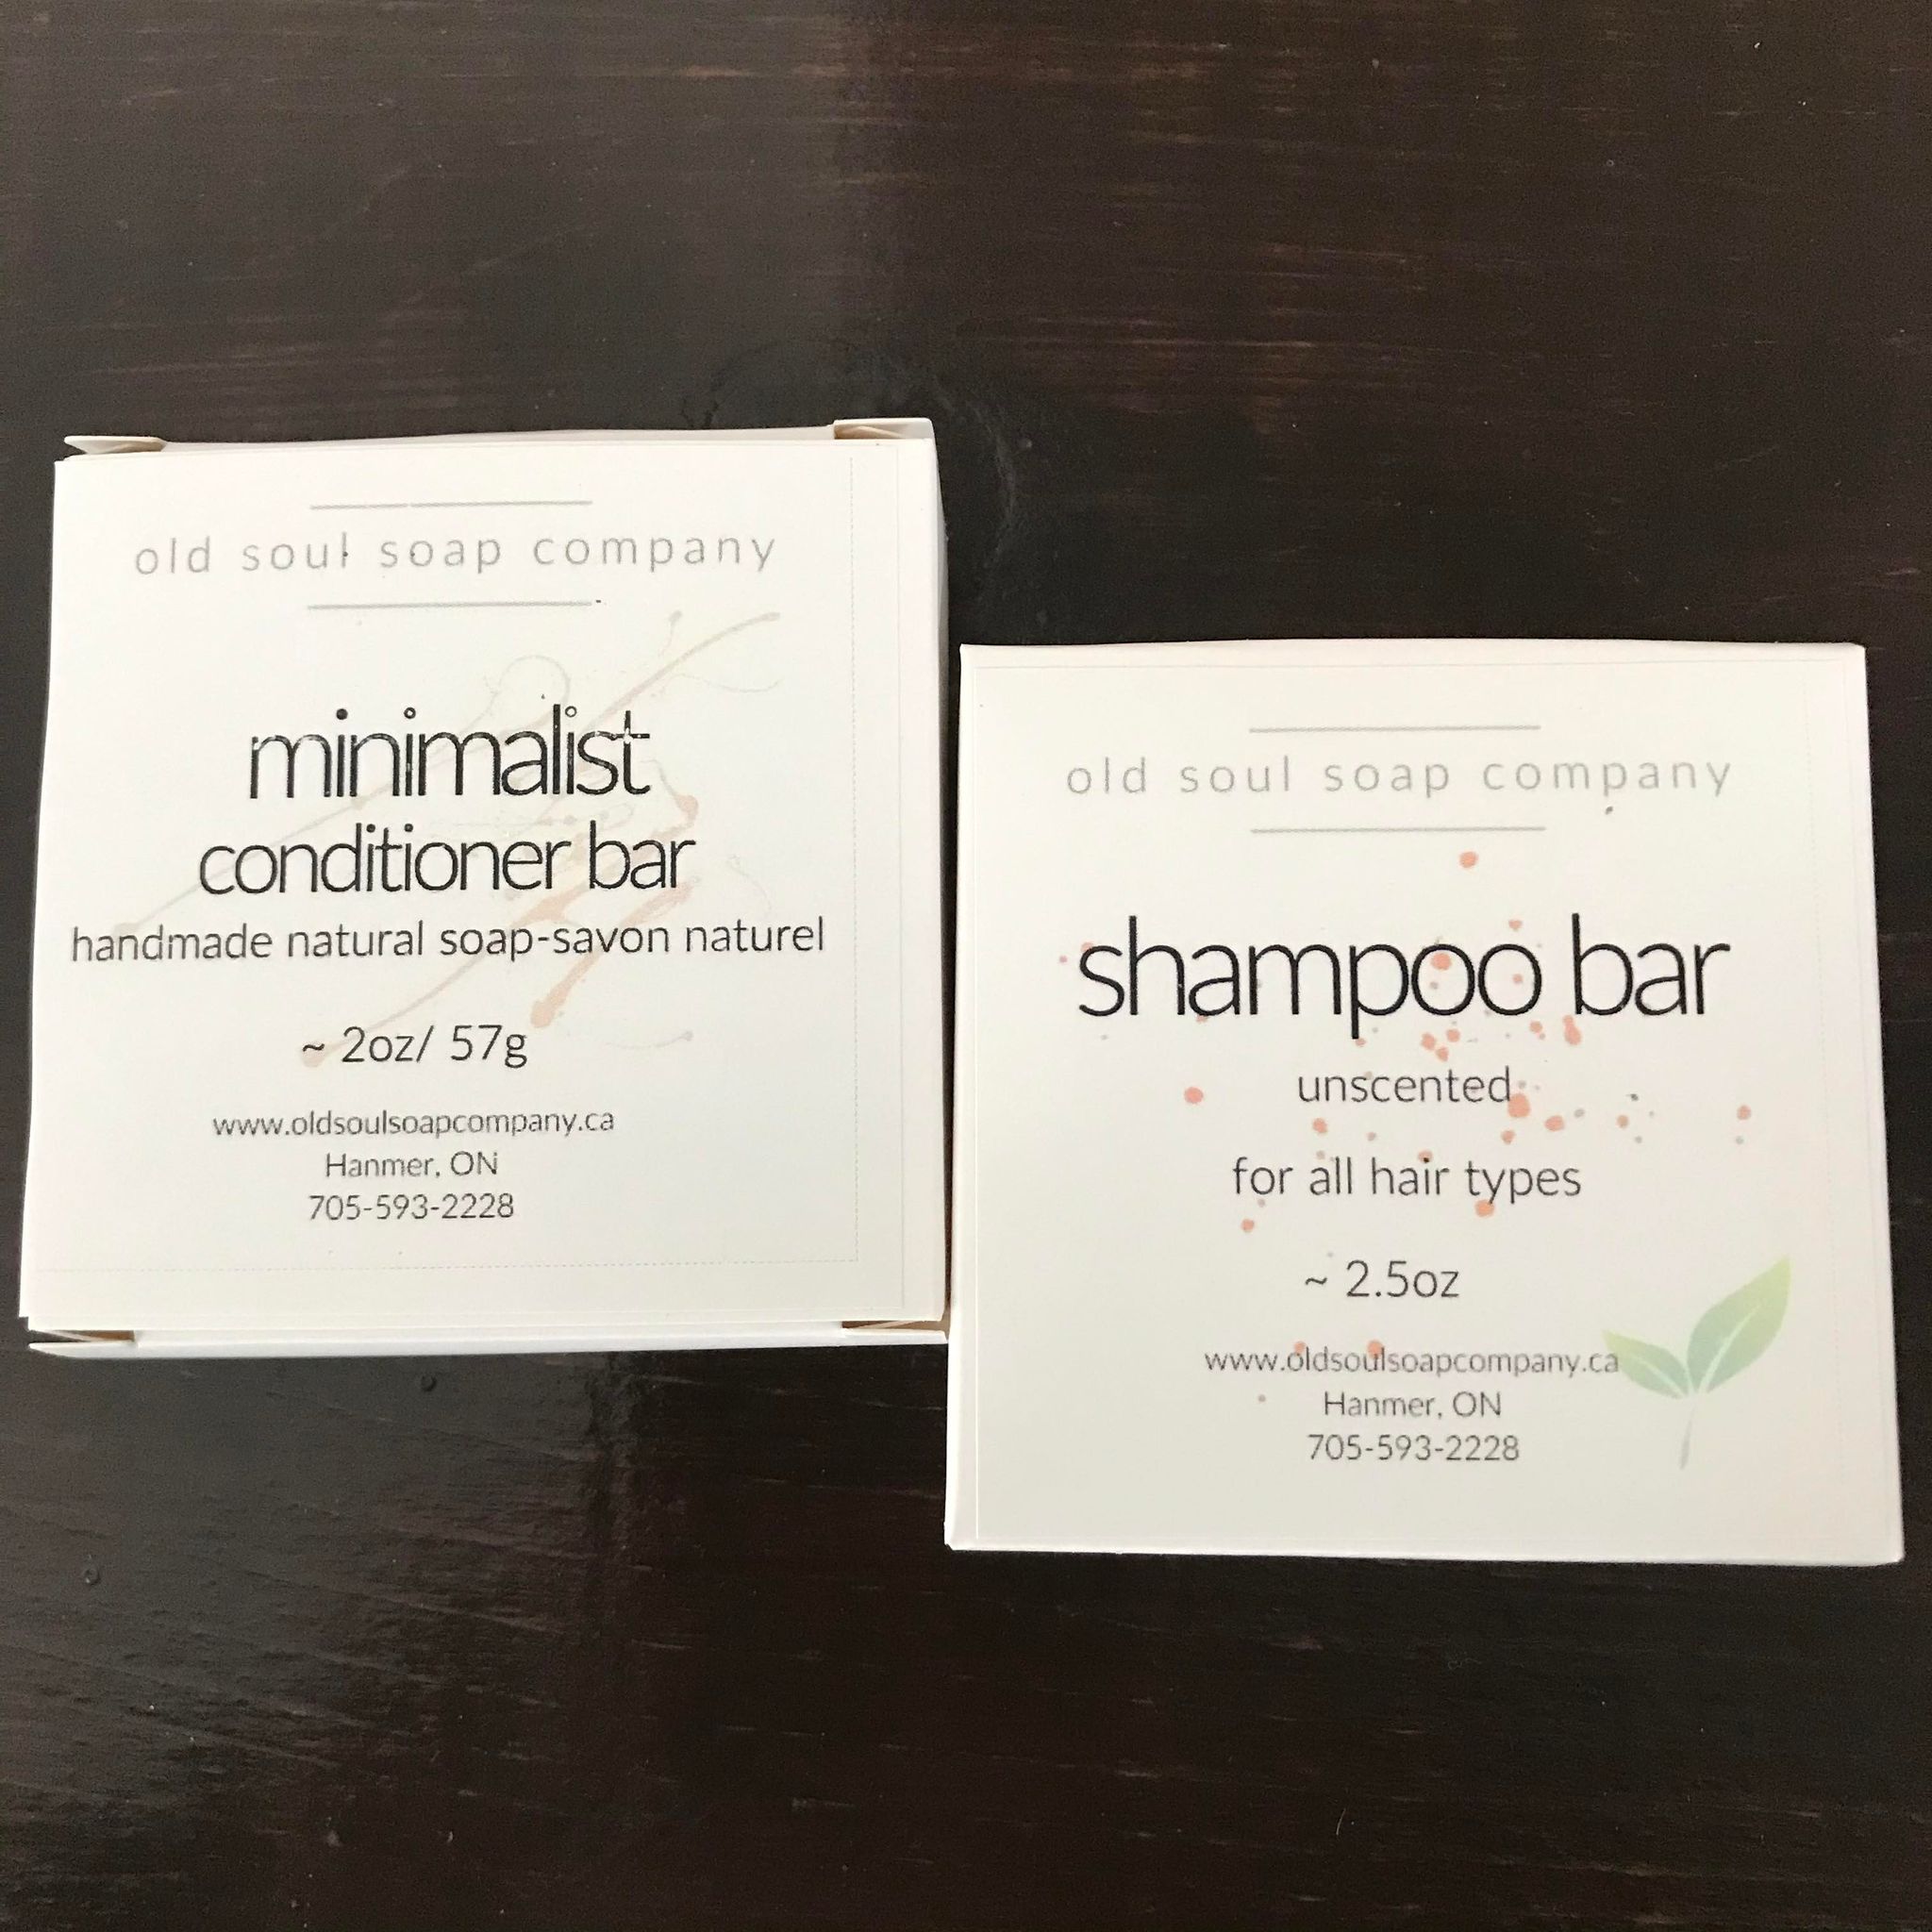 Unscented shampoo bar and minimalist conditioner bar set in individual boxes made in Canada by the Old Soul Soap Company